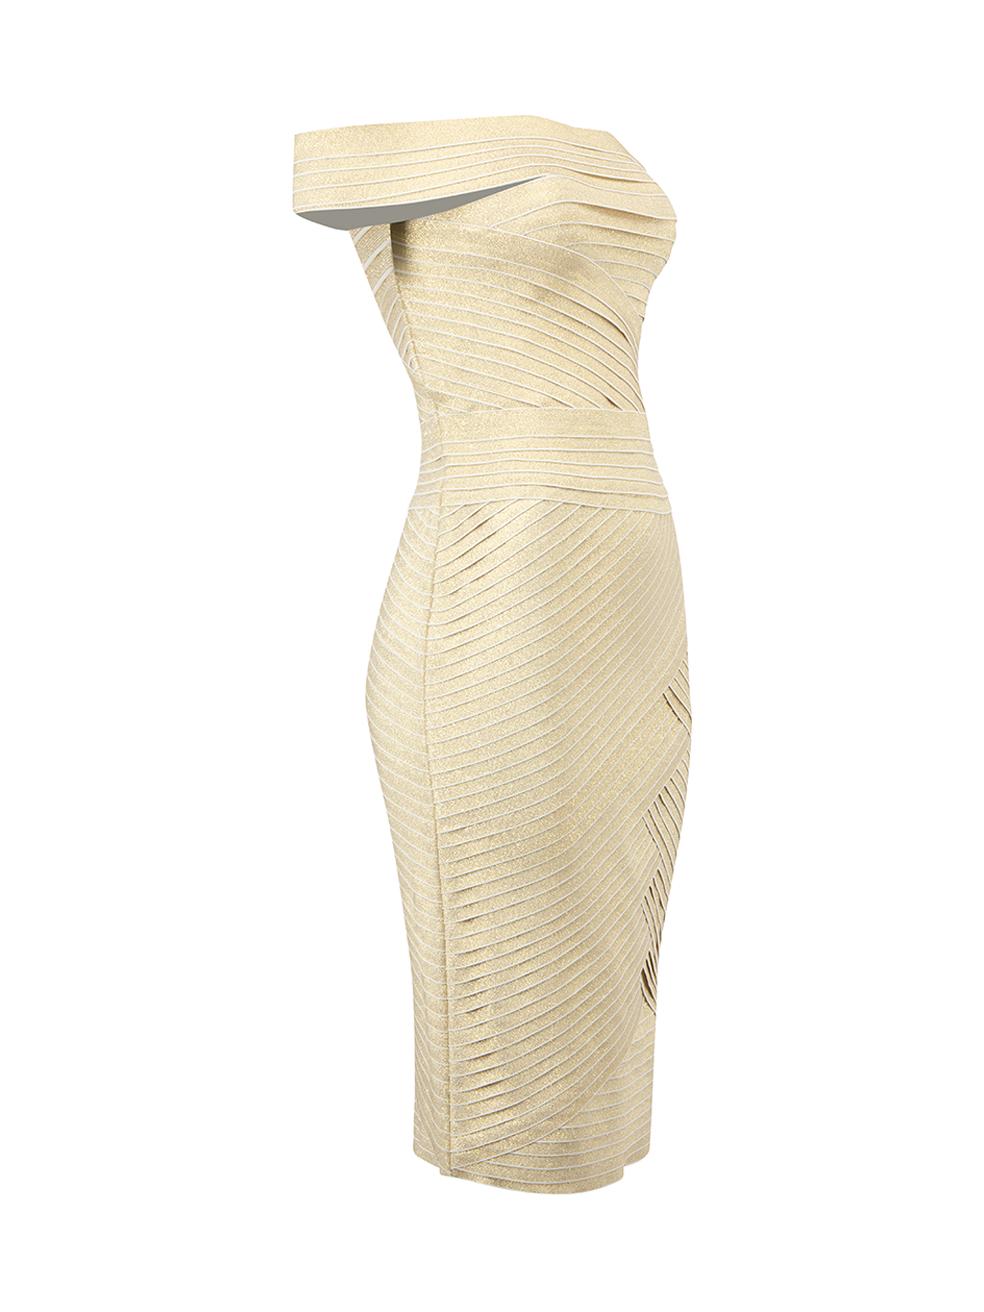 CONDITION is Very good. Minimal wear to dress is evident. Minimal wear to the interior of the dress where some marks can be seen on this used Pierre Balmain designer resale item. 
 
 Details
  Gold
 Polyester
 Mini dress
 Bandage bodycon fit
 Off